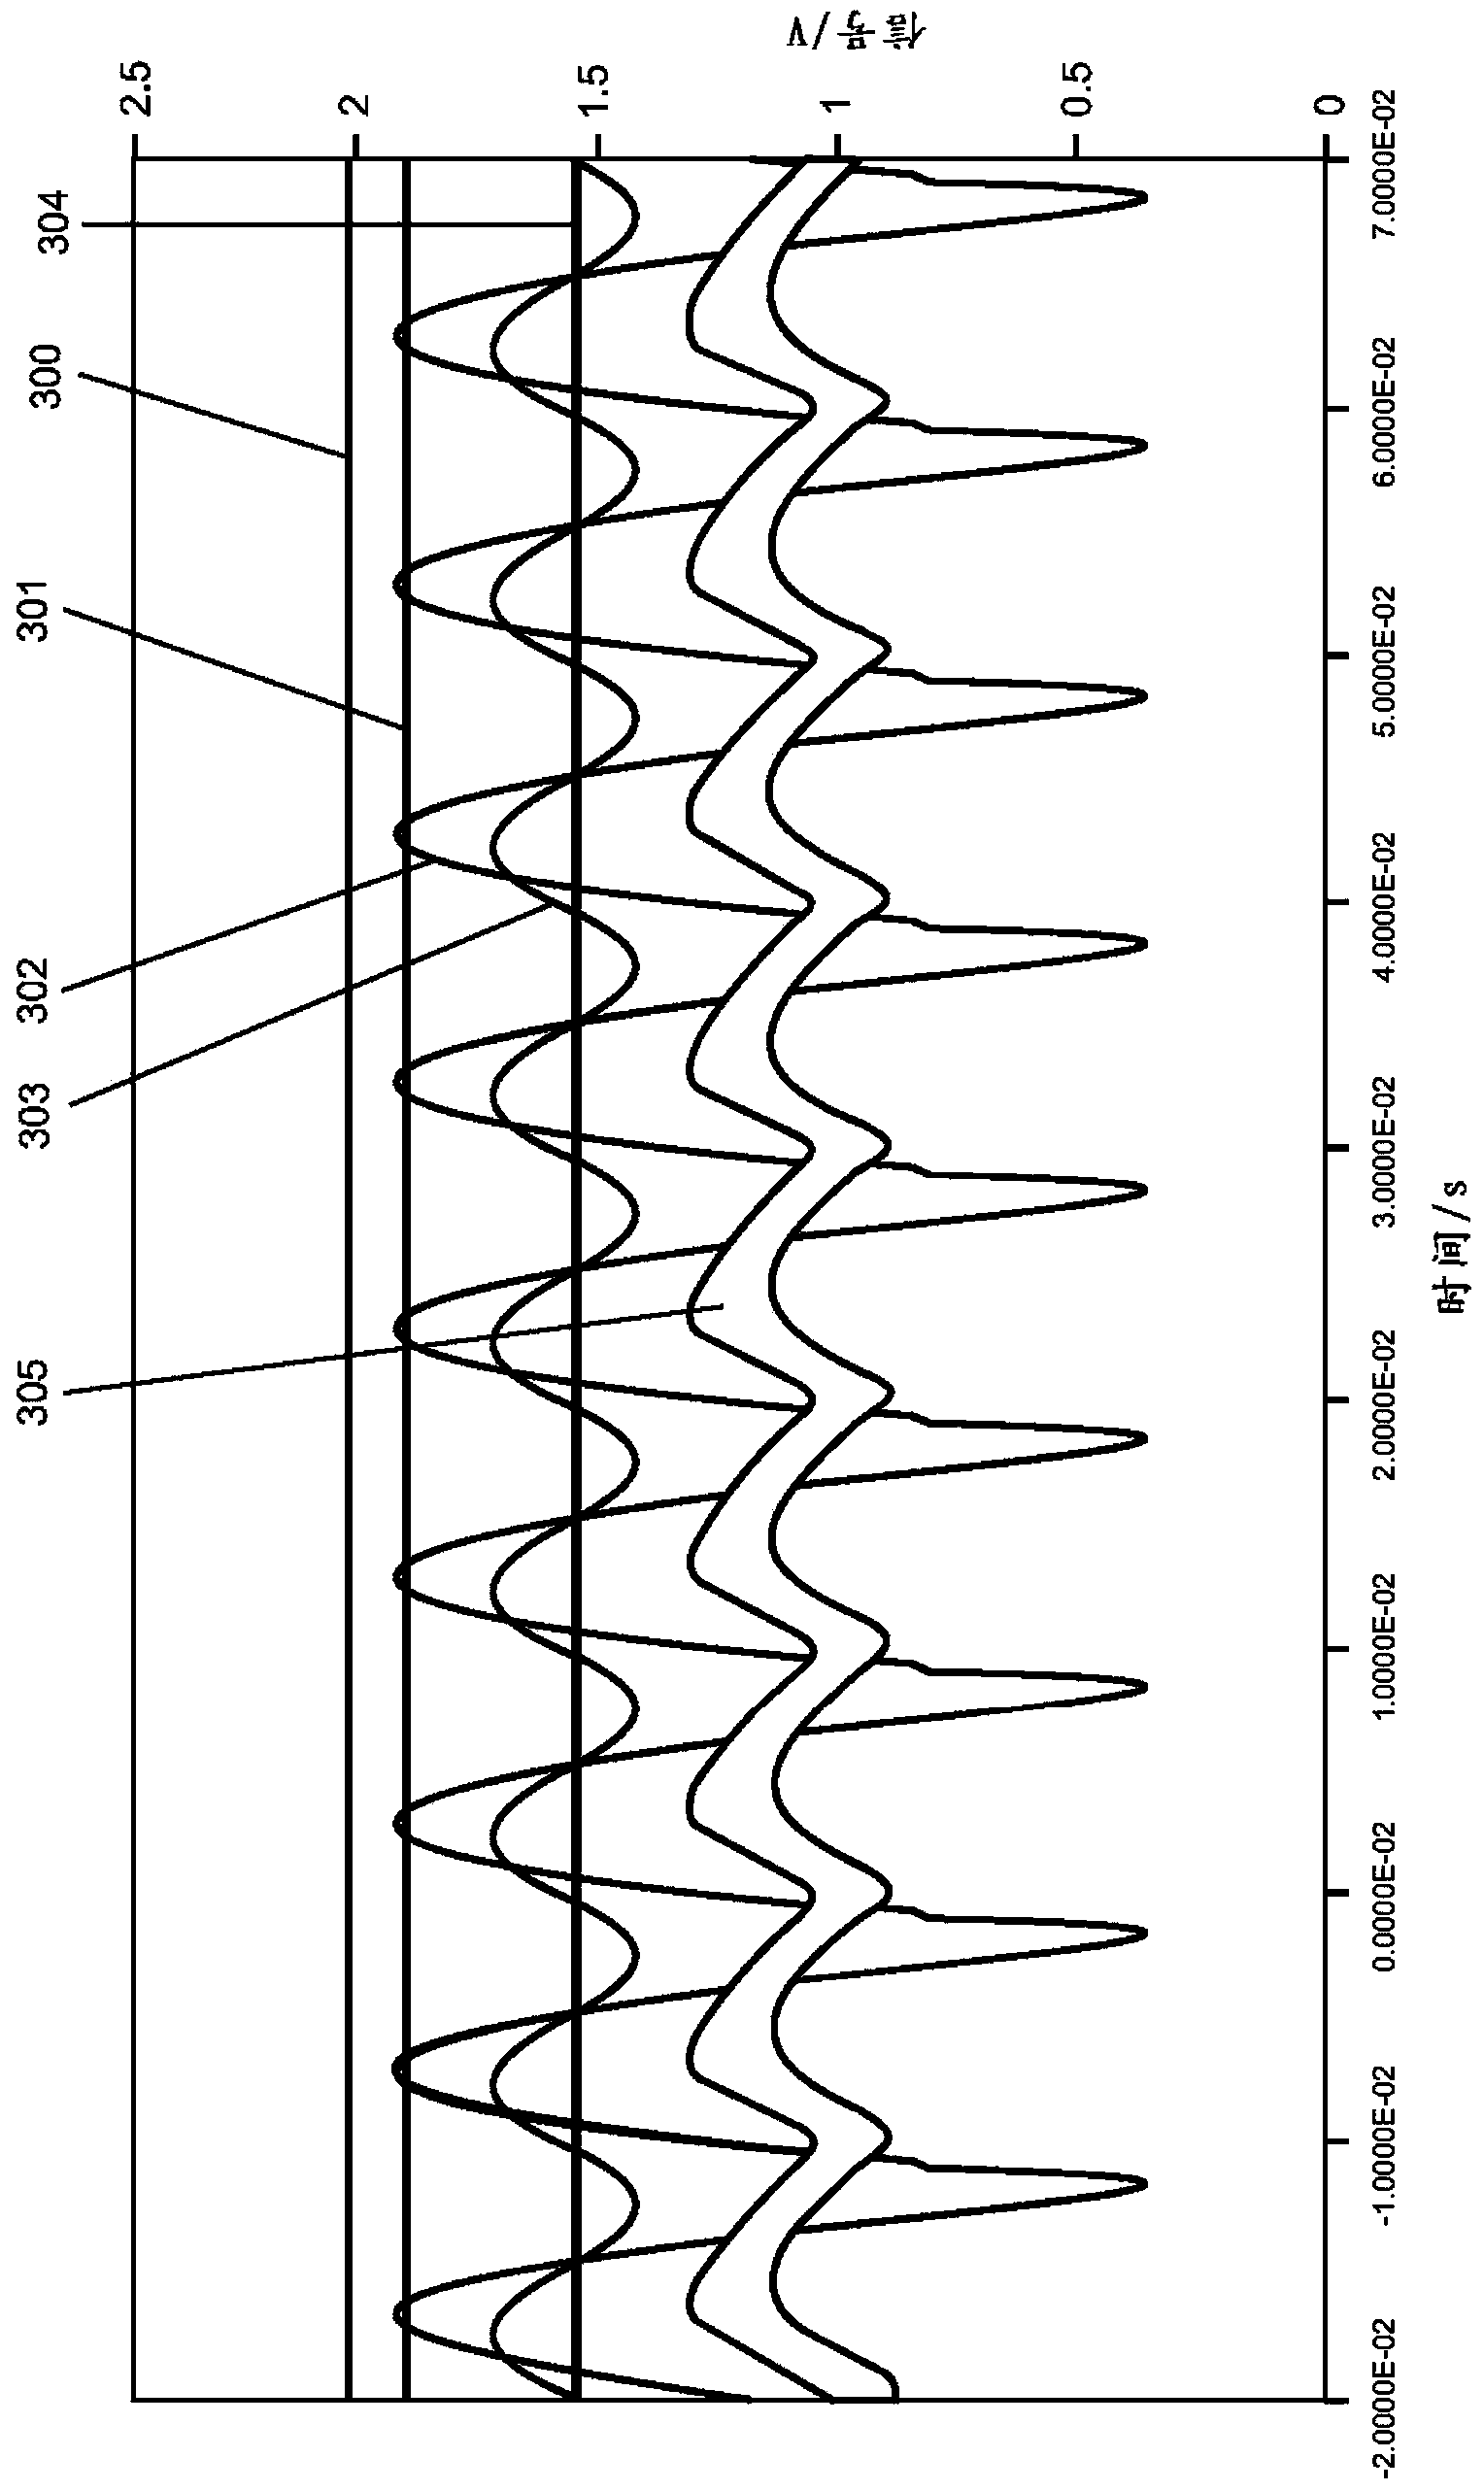 Unit for determining the type of a dominating light source by means of two photodiodes